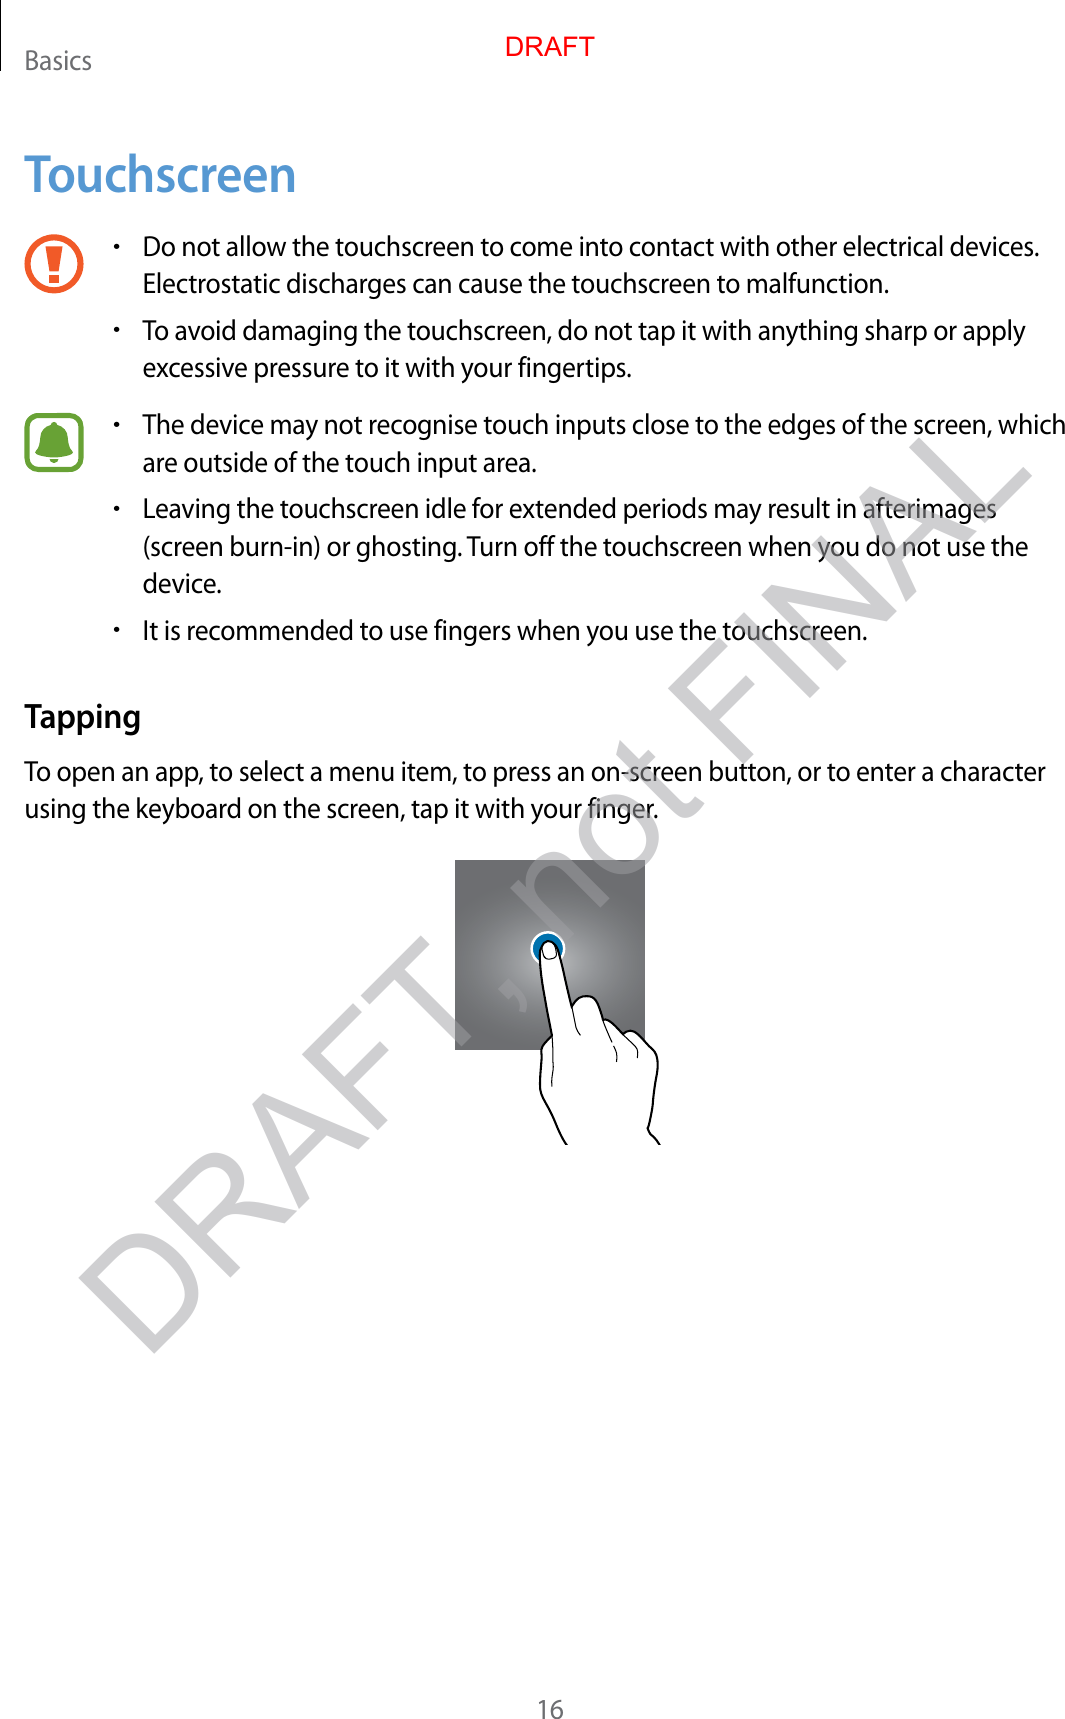 Basics16Touchscreen•Do not allow the touchscr een to c ome int o con tact with other electrical devices .Electrostatic discharges can cause the touchscr een t o malfunction.•To av oid damaging the t ouchscr een, do not tap it with an ything sharp or applyex cessiv e pr essur e t o it with y our fingertips.•The device ma y not r ecog nise t ouch inputs close to the edges of the scr een, whichare outside of the touch input ar ea.•Lea ving the t ouchscr een idle f or extended periods may r esult in afterimages(screen burn-in) or ghosting . Turn off the touchscreen when you do not use thedevice.•It is recommended to use fingers when you use the t ouchscr een.TappingTo open an app , t o select a menu item, to pr ess an on-scr een button, or t o ent er a character using the keyboard on the scr een, tap it with y our finger.DRAFTDRAFT, not FINAL